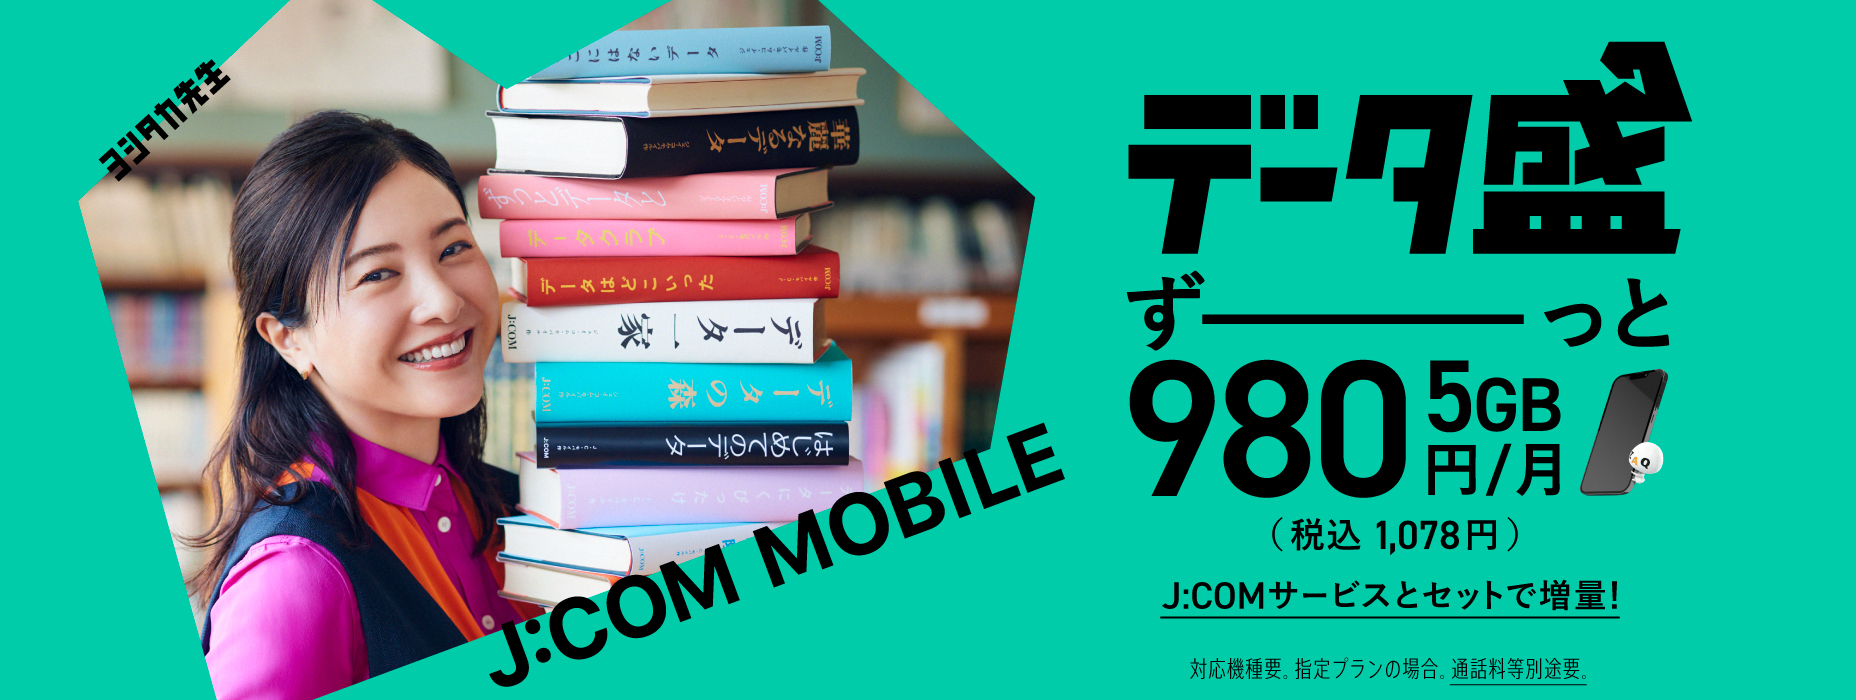 Increase the amount of data on your smartphone by combining it with Date Mori J:COM service! 5GB 980 yen/month (1078 yen including tax)